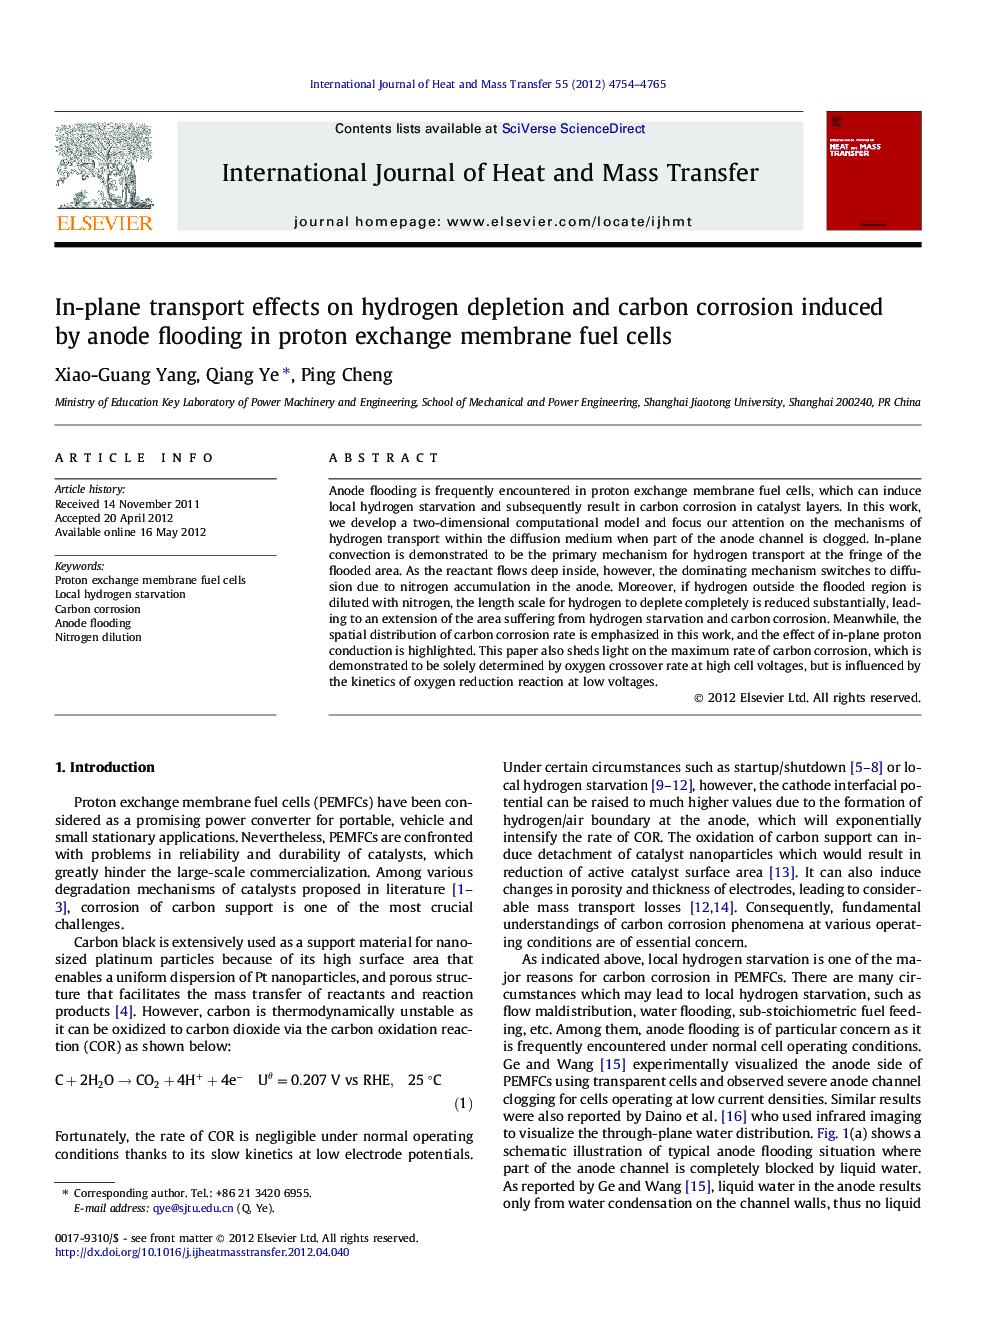 In-plane transport effects on hydrogen depletion and carbon corrosion induced by anode flooding in proton exchange membrane fuel cells